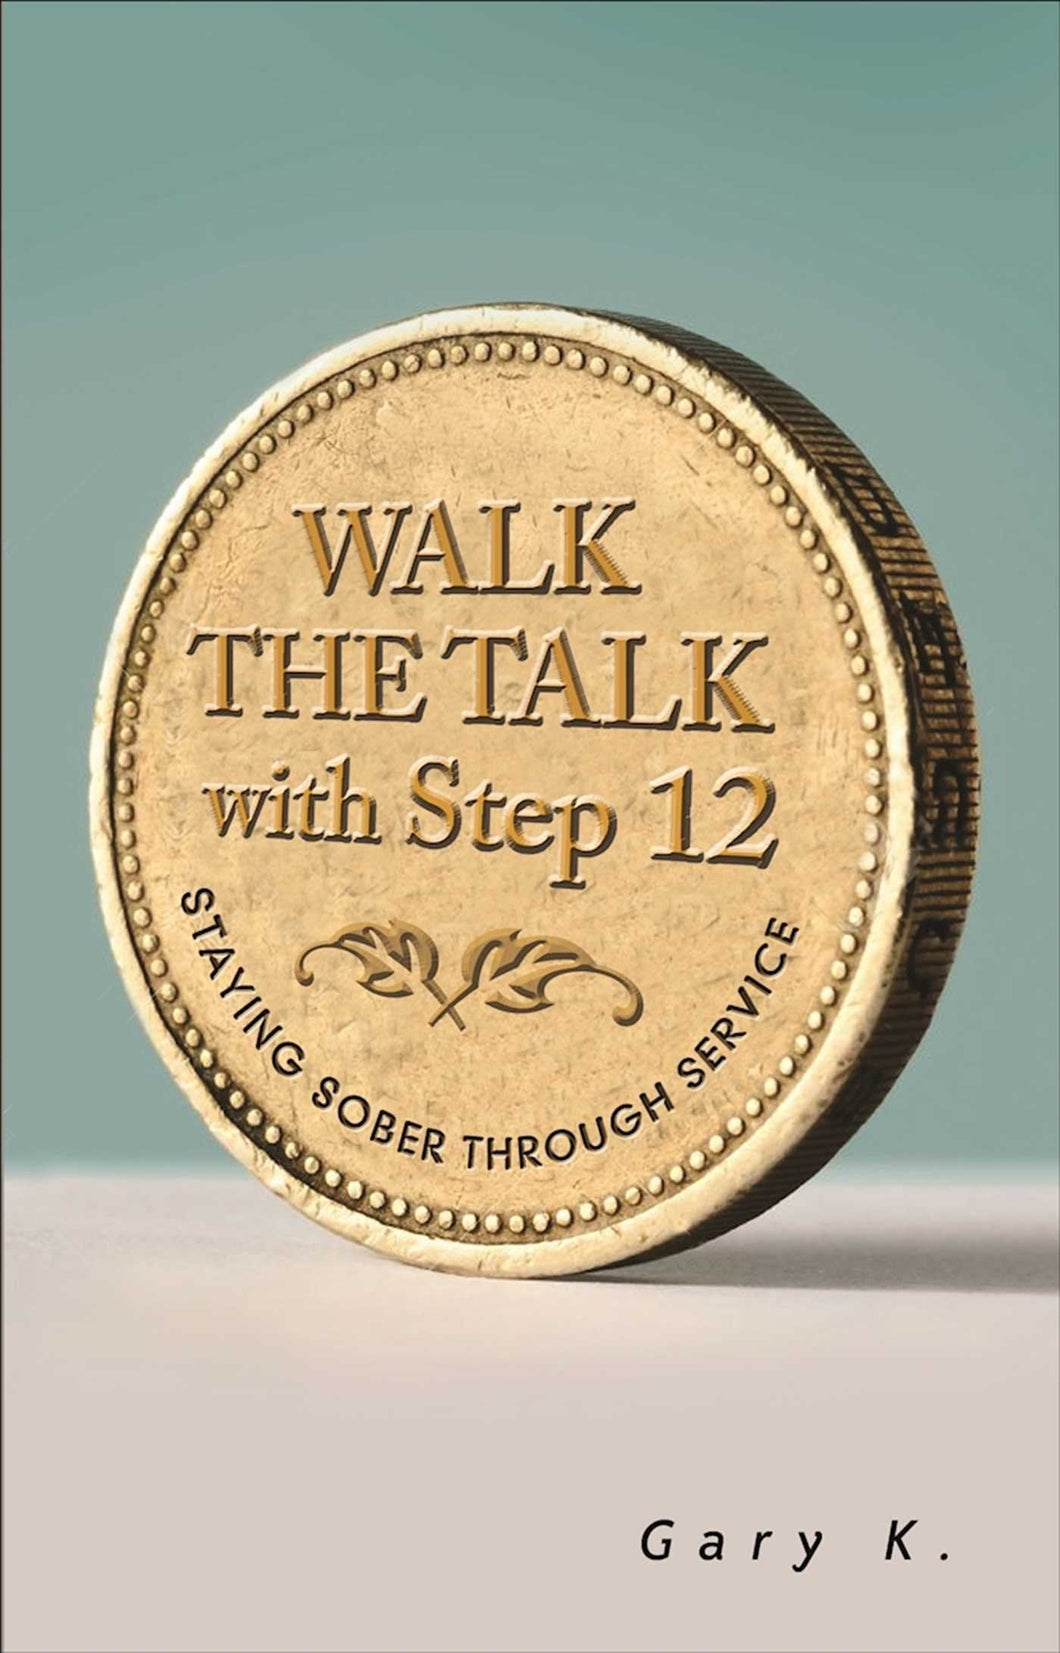 Walk The Talk with Step 12